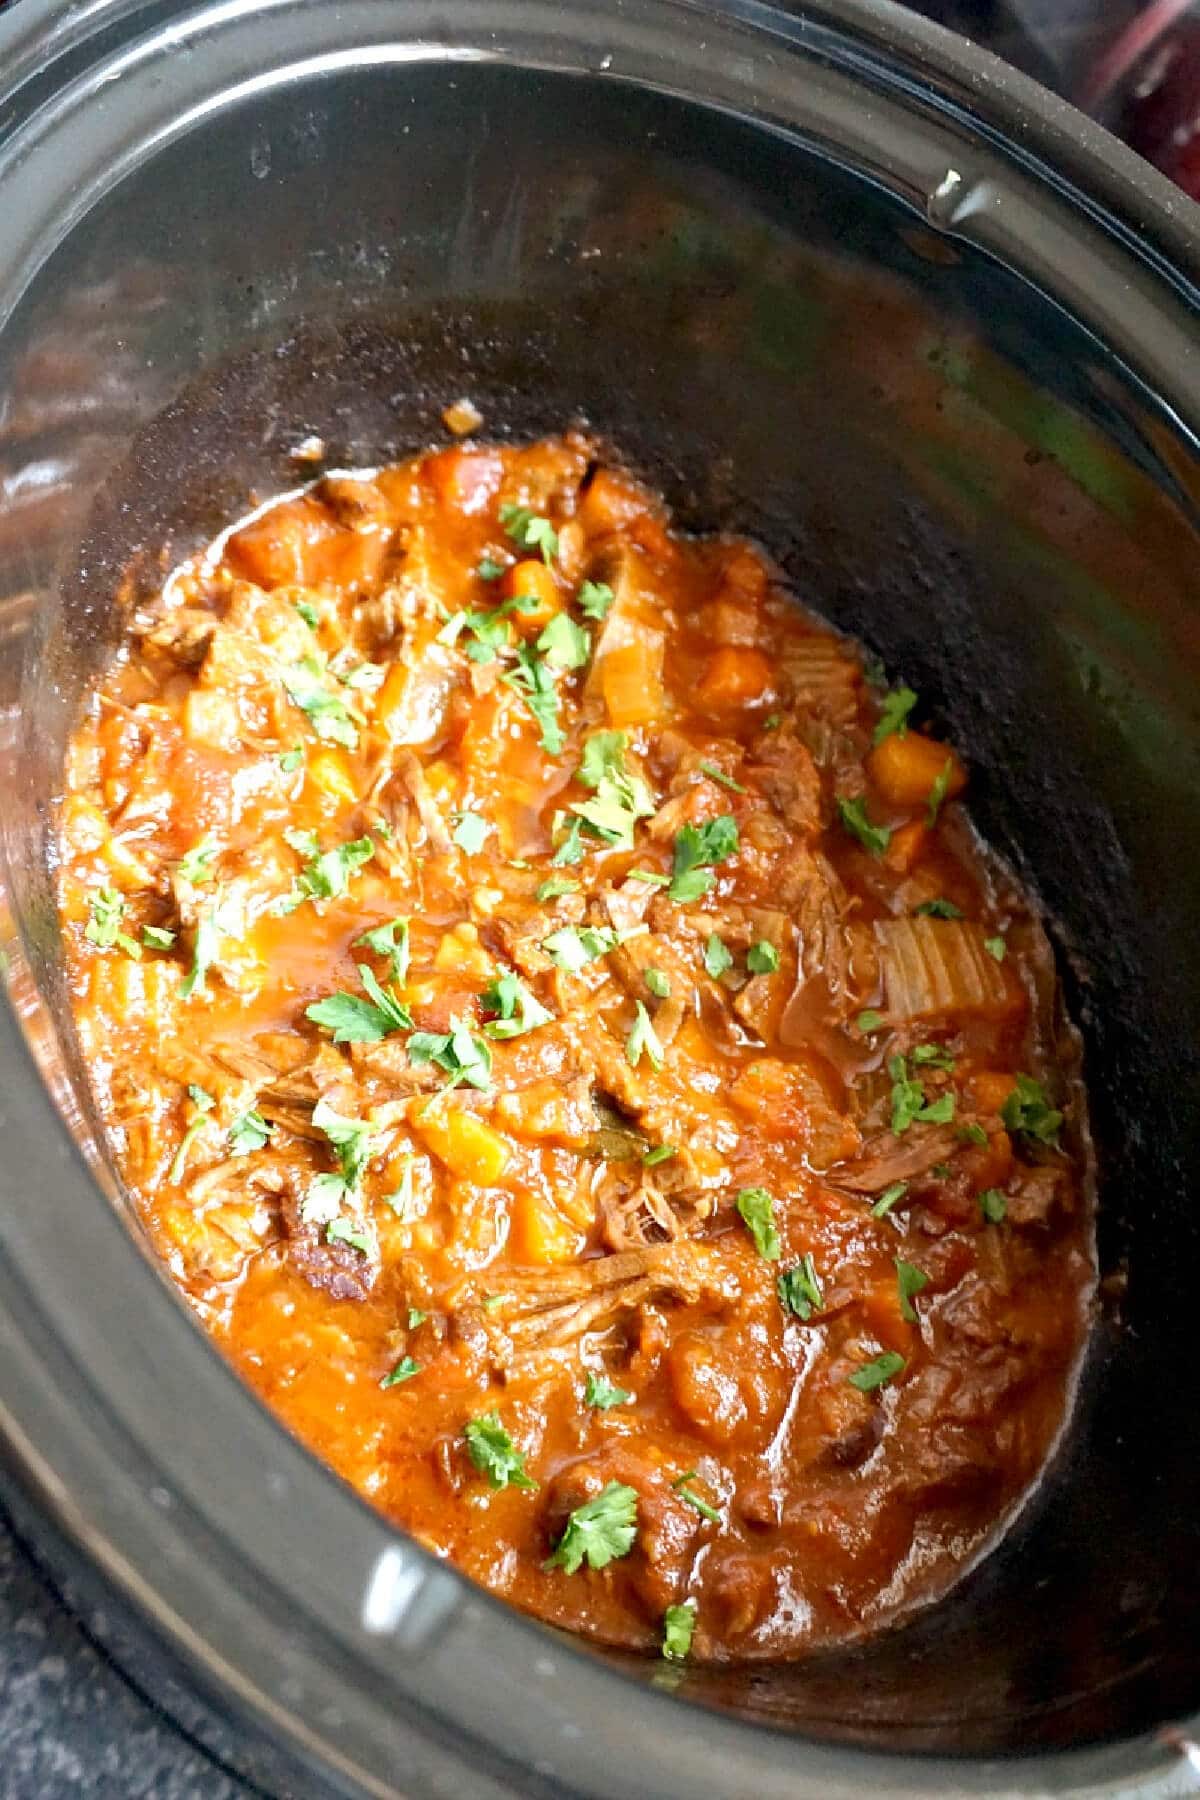 A slow cooker with beef ragu.